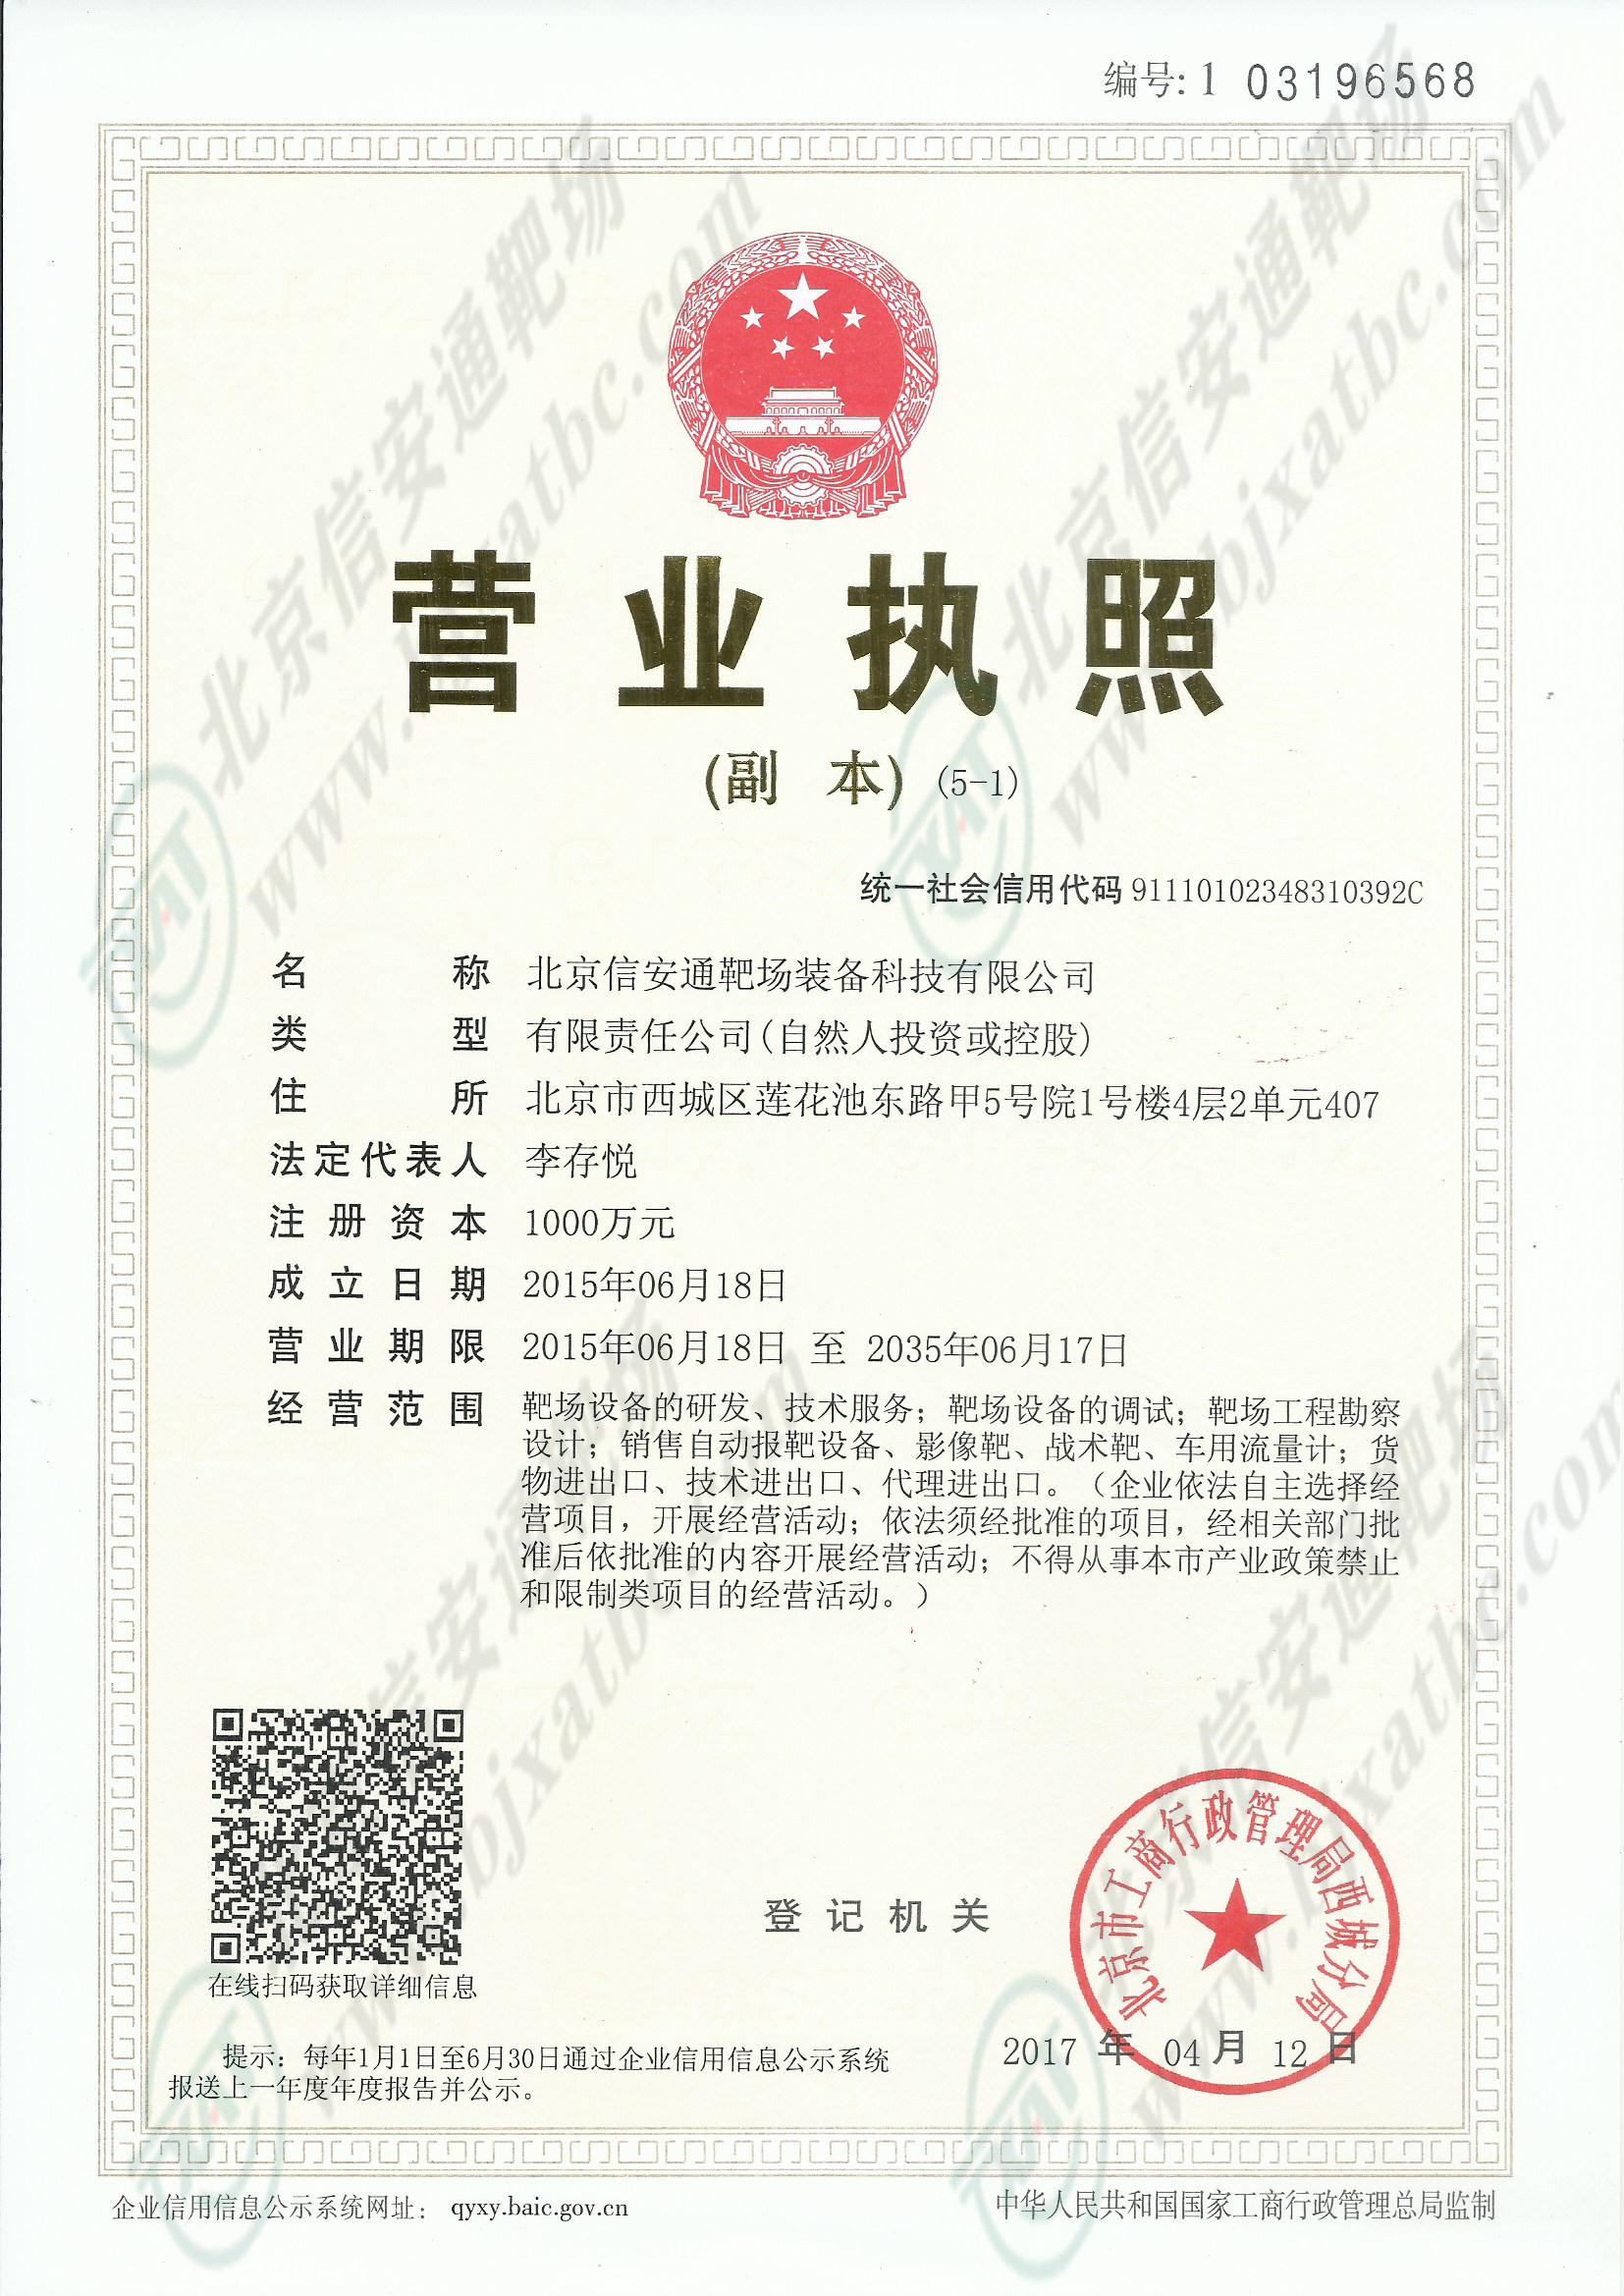 Copy of Business License